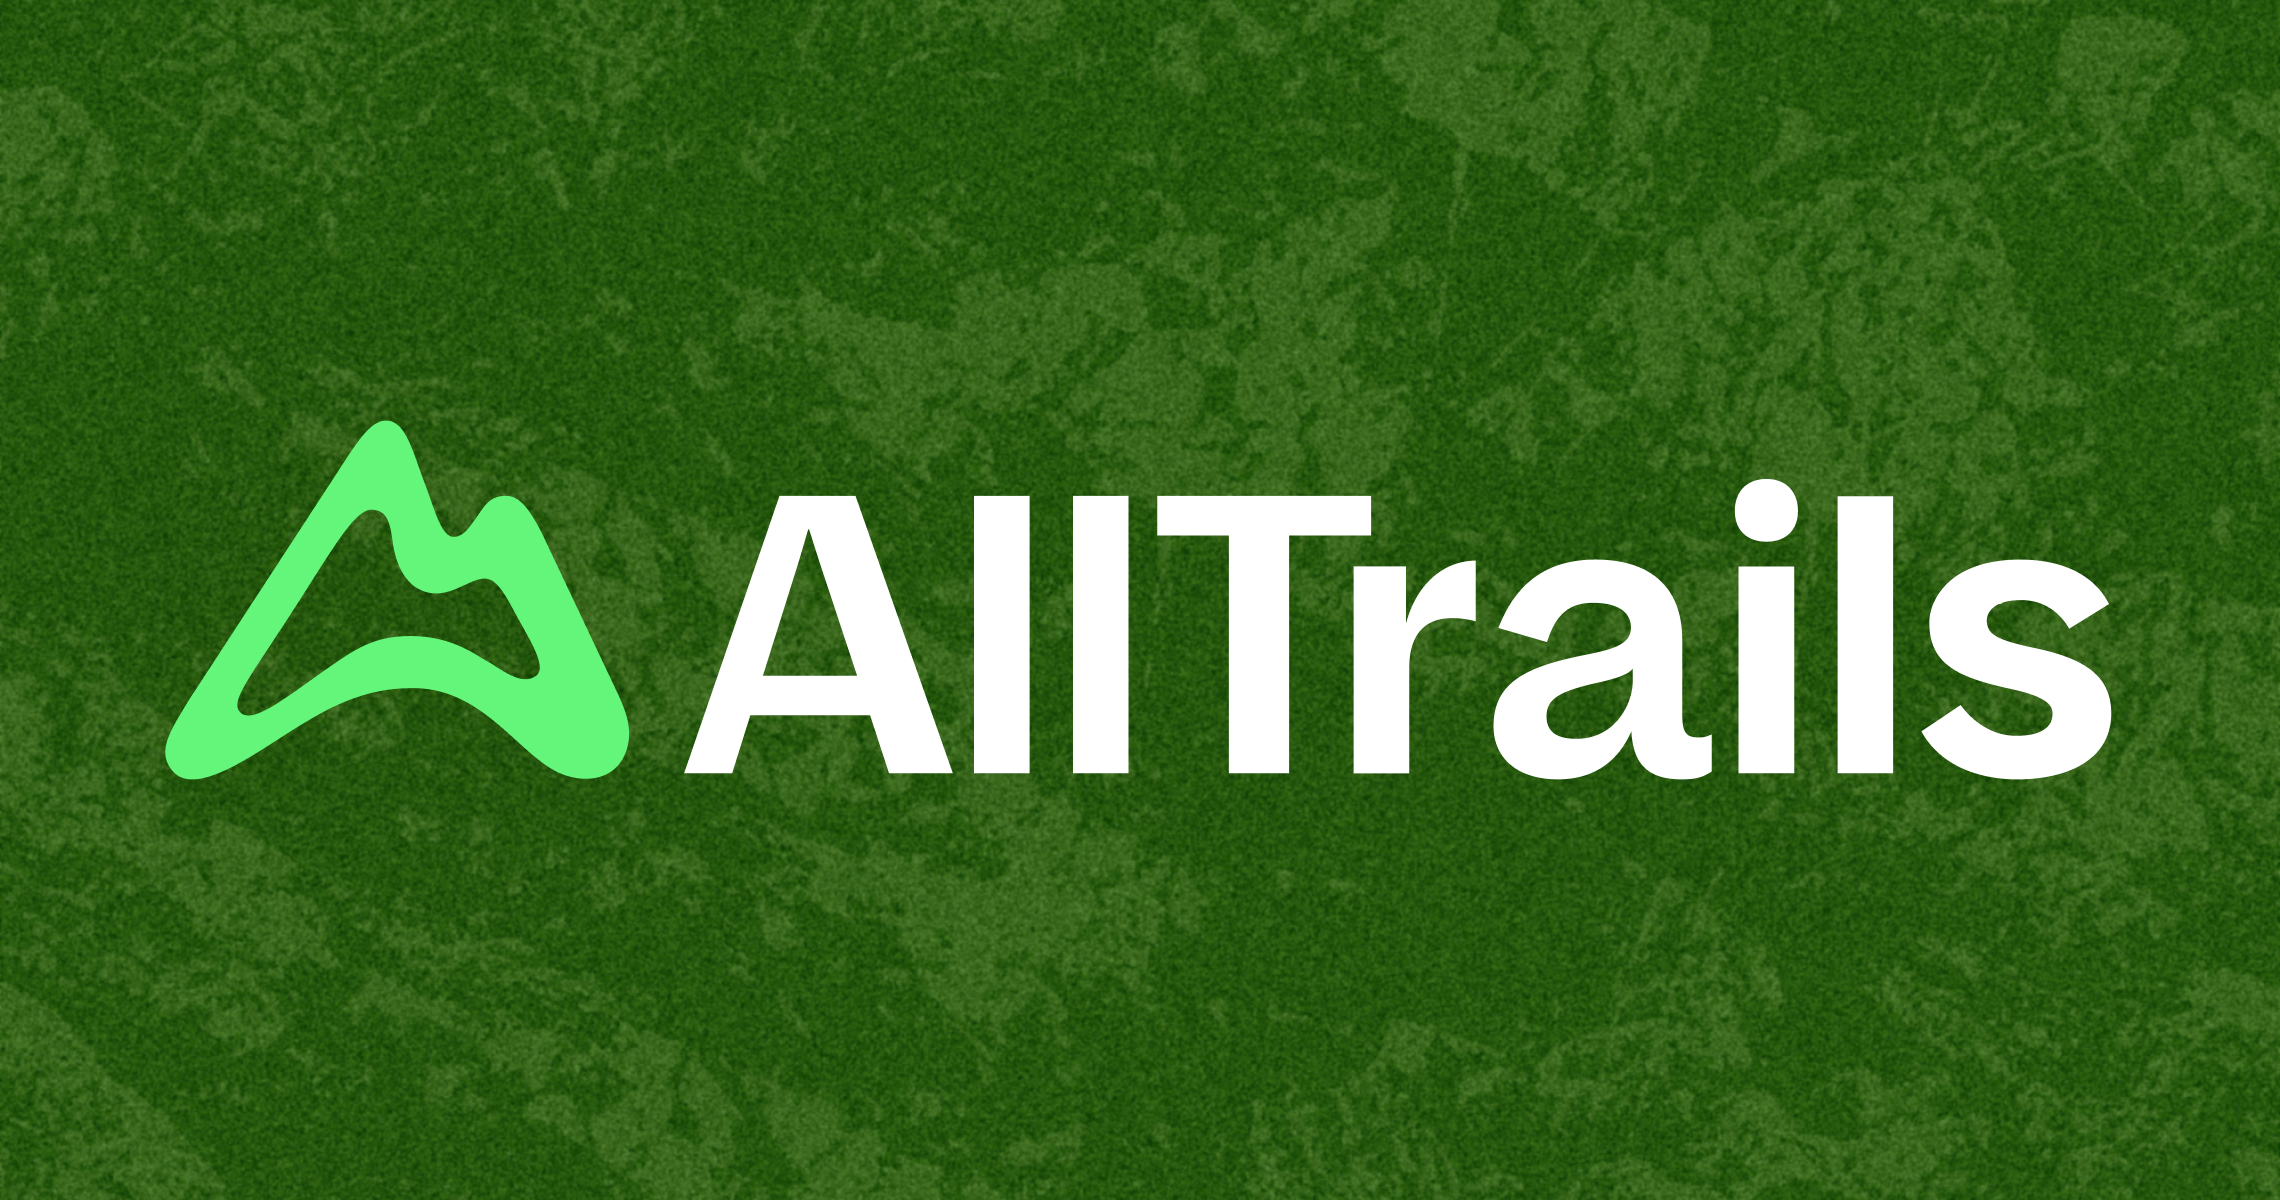 AllTrails: Trail Guides & Maps for Hiking, Camping, and Running